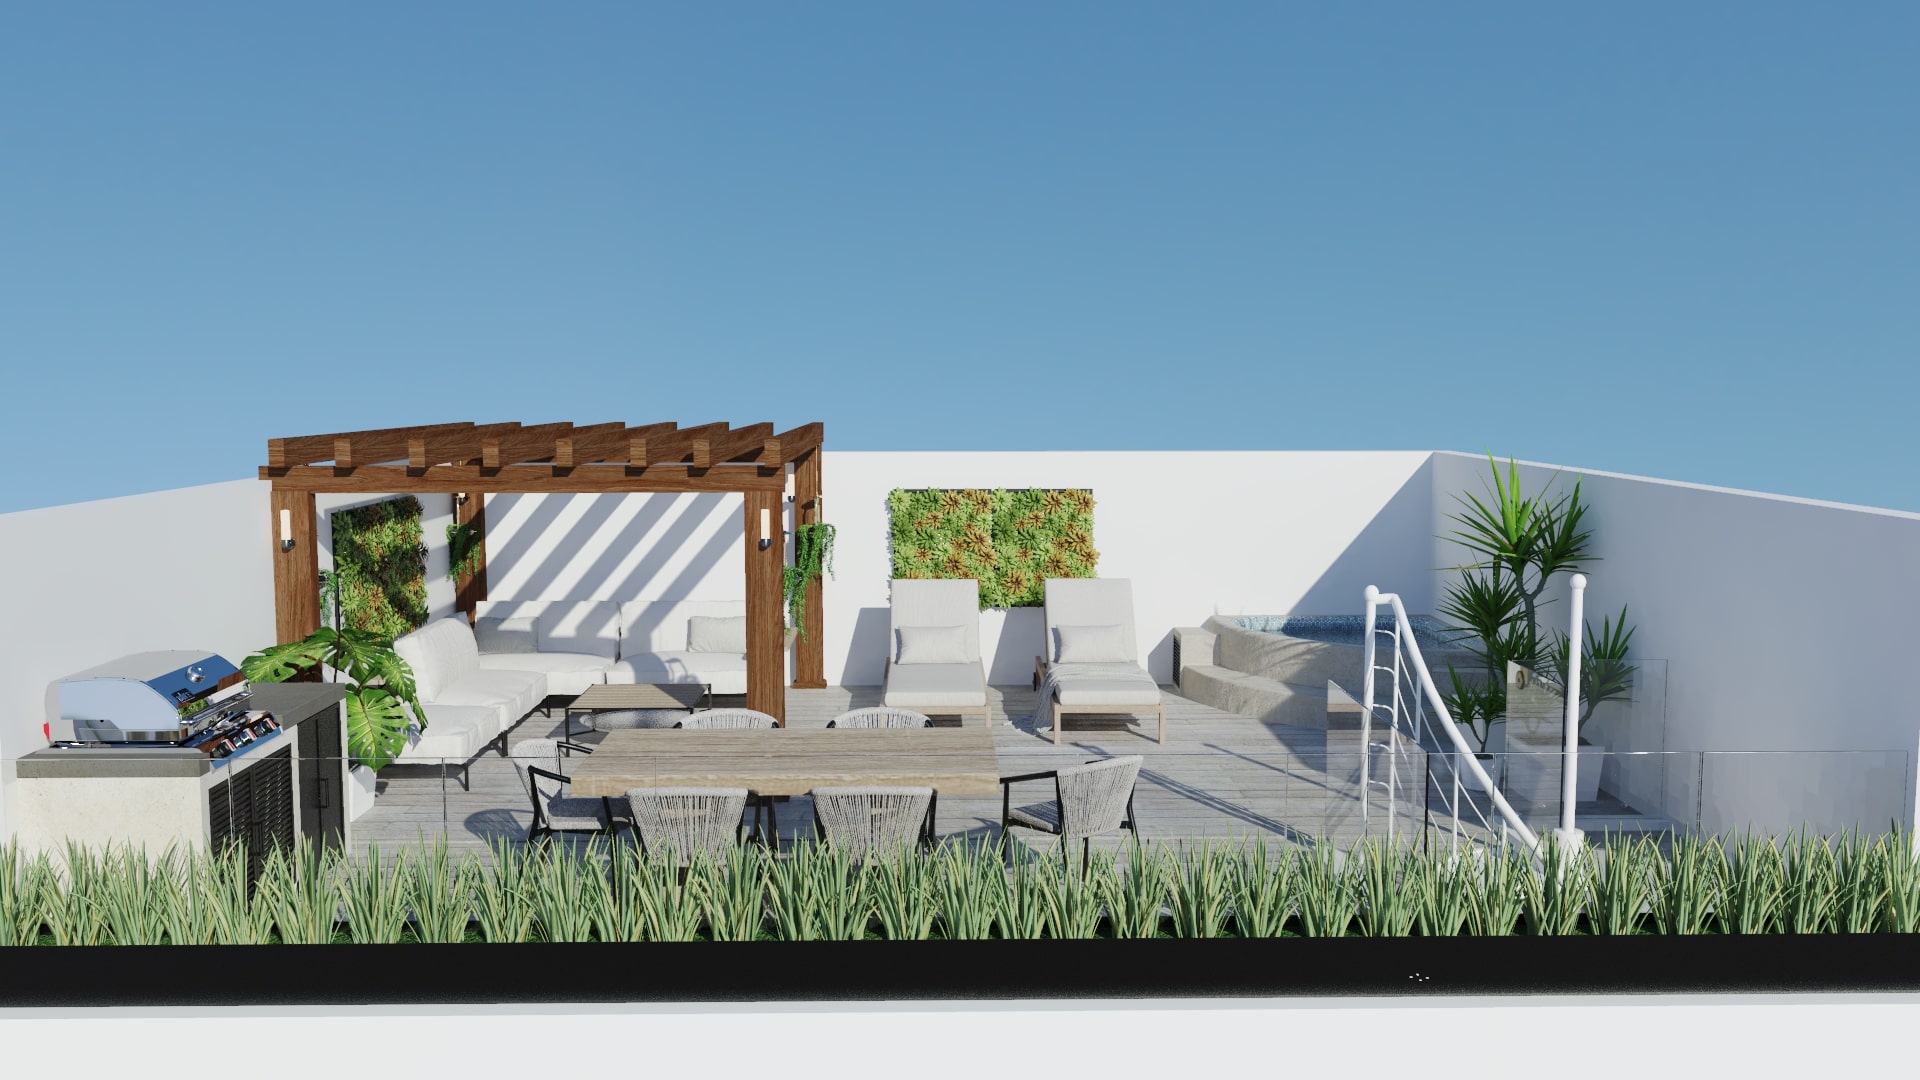 Rendering of a roof top garden space at Casa Adobe